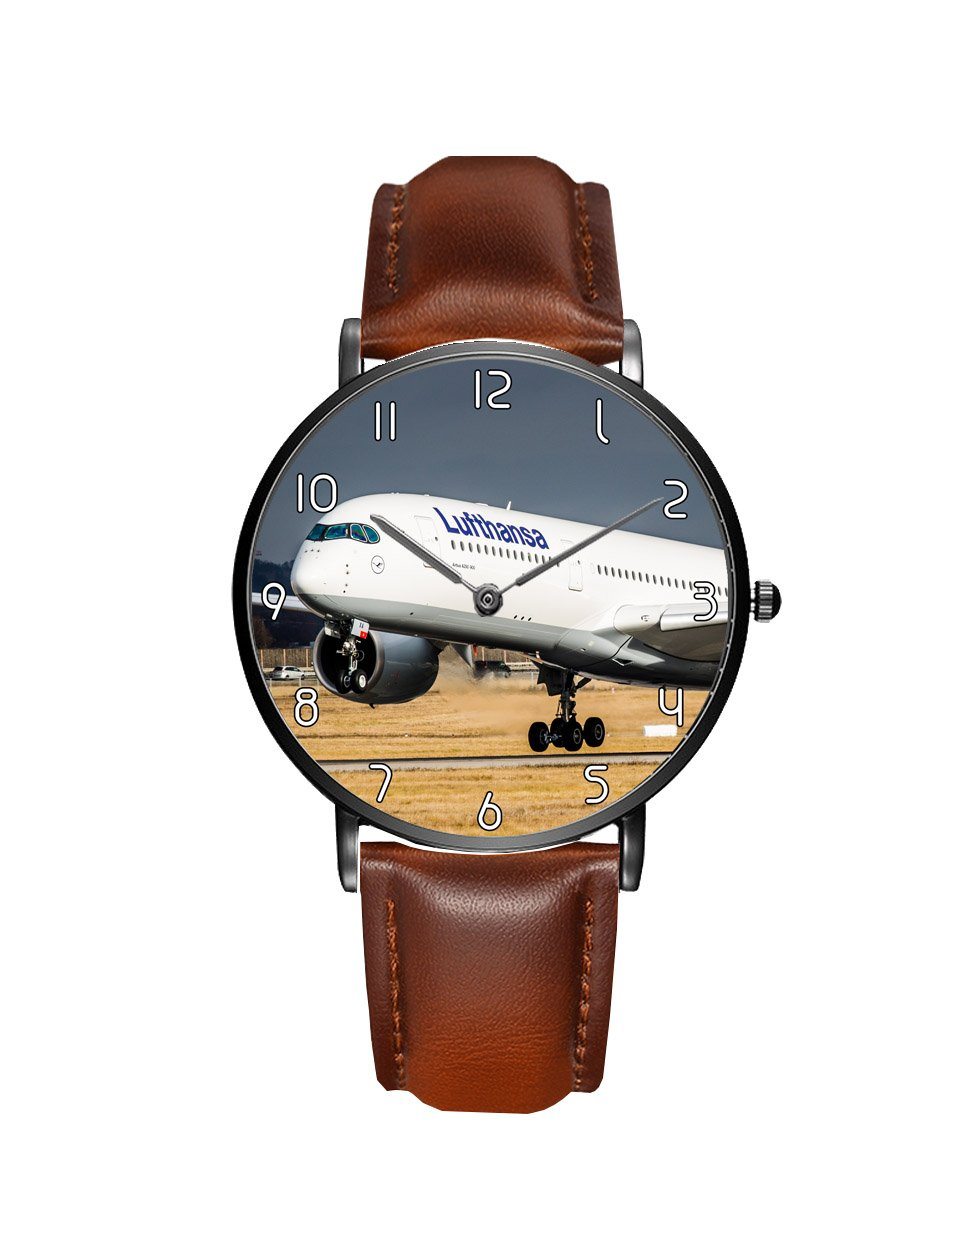 Lutfhansa A350 Printed Leather Strap Watches Aviation Shop Black & Brown Leather Strap 